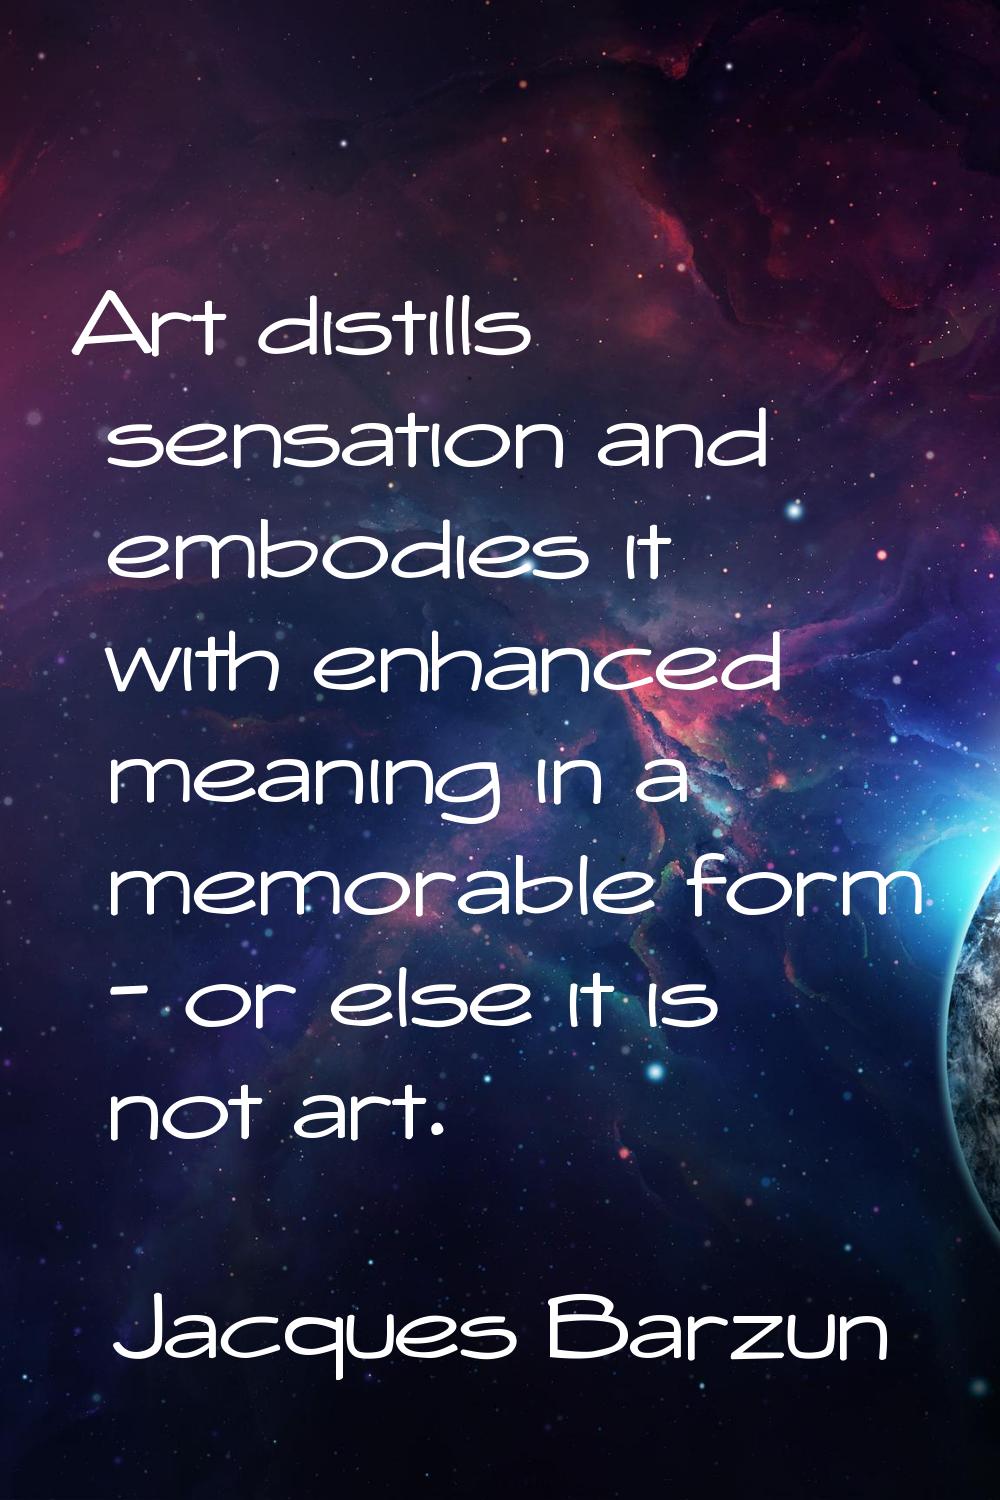 Art distills sensation and embodies it with enhanced meaning in a memorable form - or else it is no